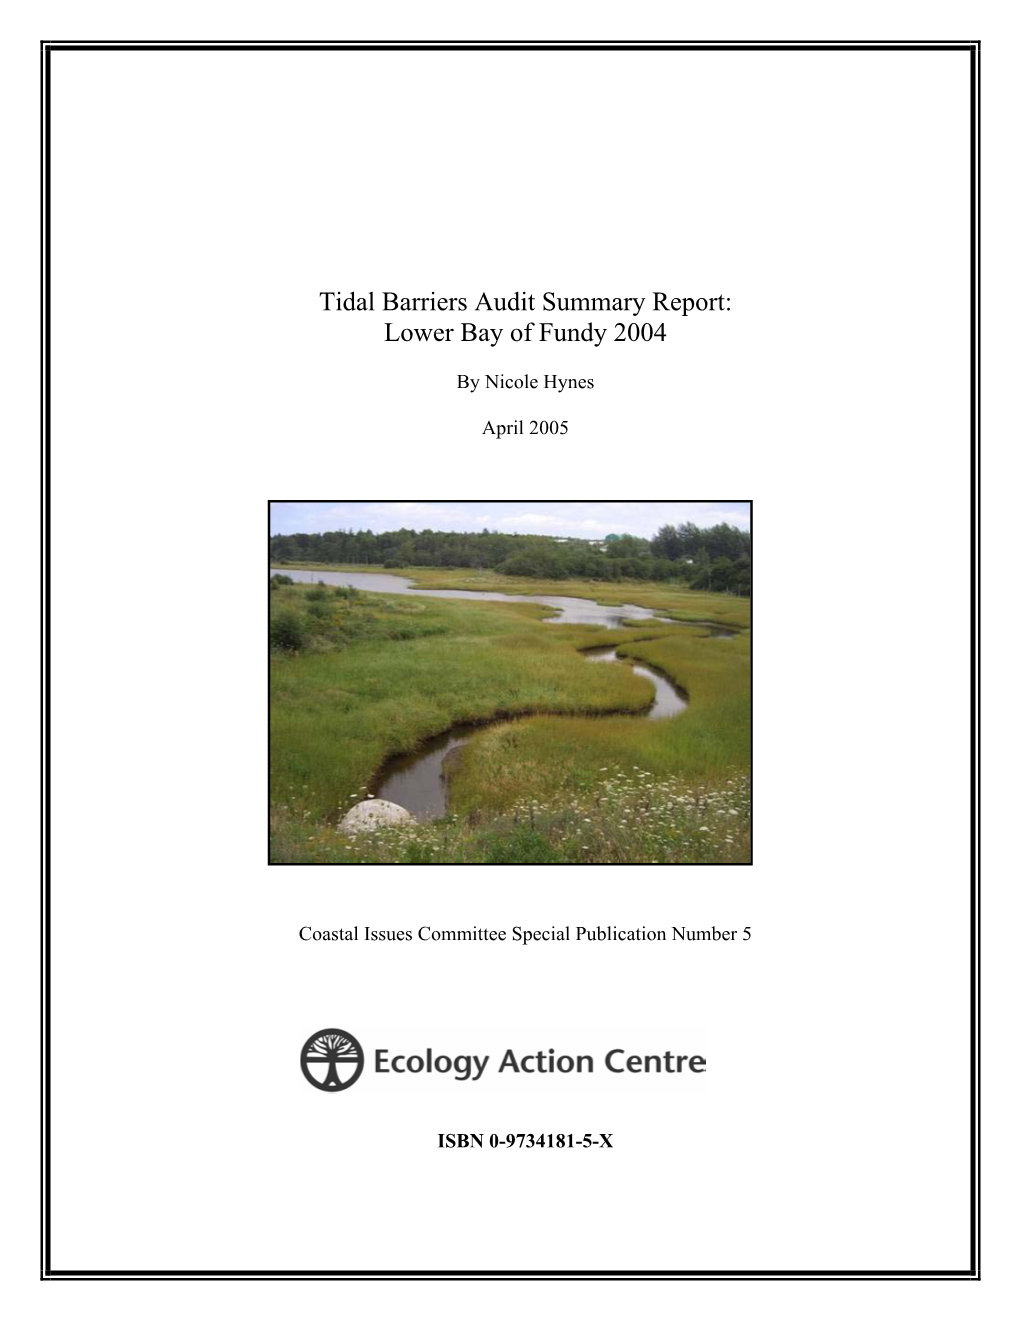 Tidal Barriers Audit Summary Report: Lower Bay of Fundy 2004